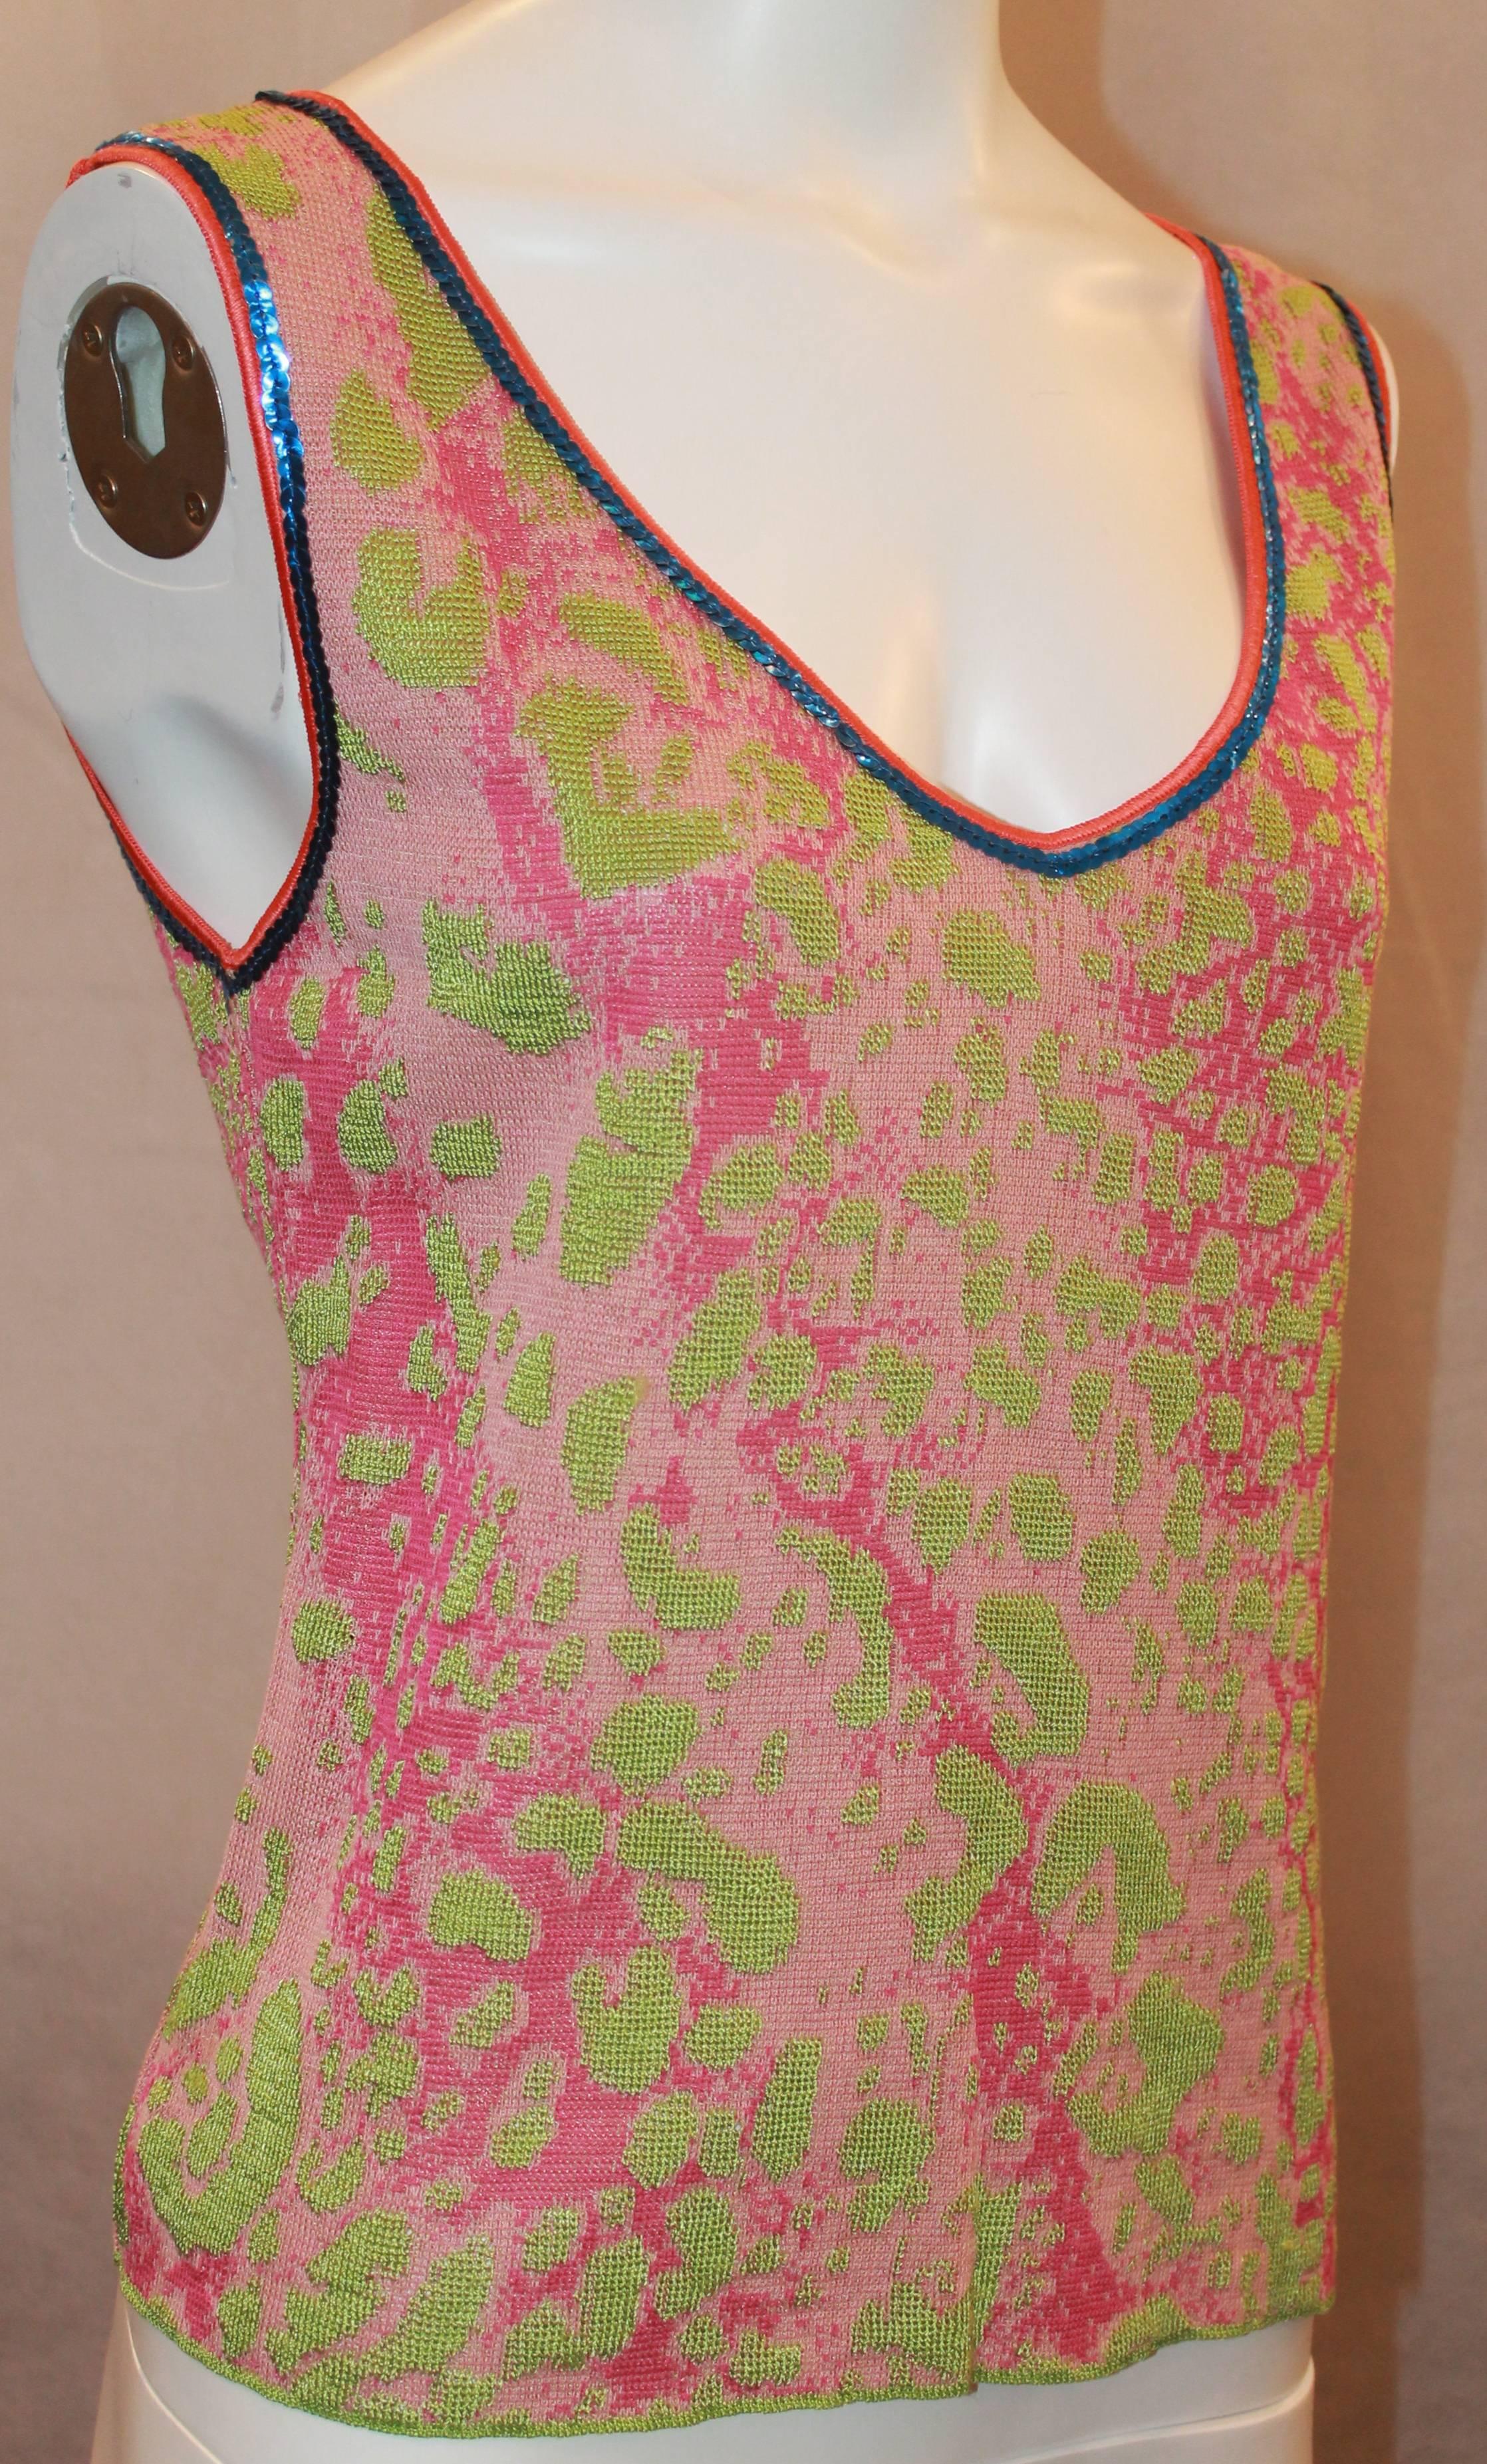 Emanuel Ungaro Pink & Green Silk Knit Tank w/ Blue Sequin Trim - 8 - NWT.  This lovely top is in excellent condition, new with tags.  It features a soft pink and green silk knit, a beautiful blue sequin trim, and a V-neck.

Measurements:
Bust: